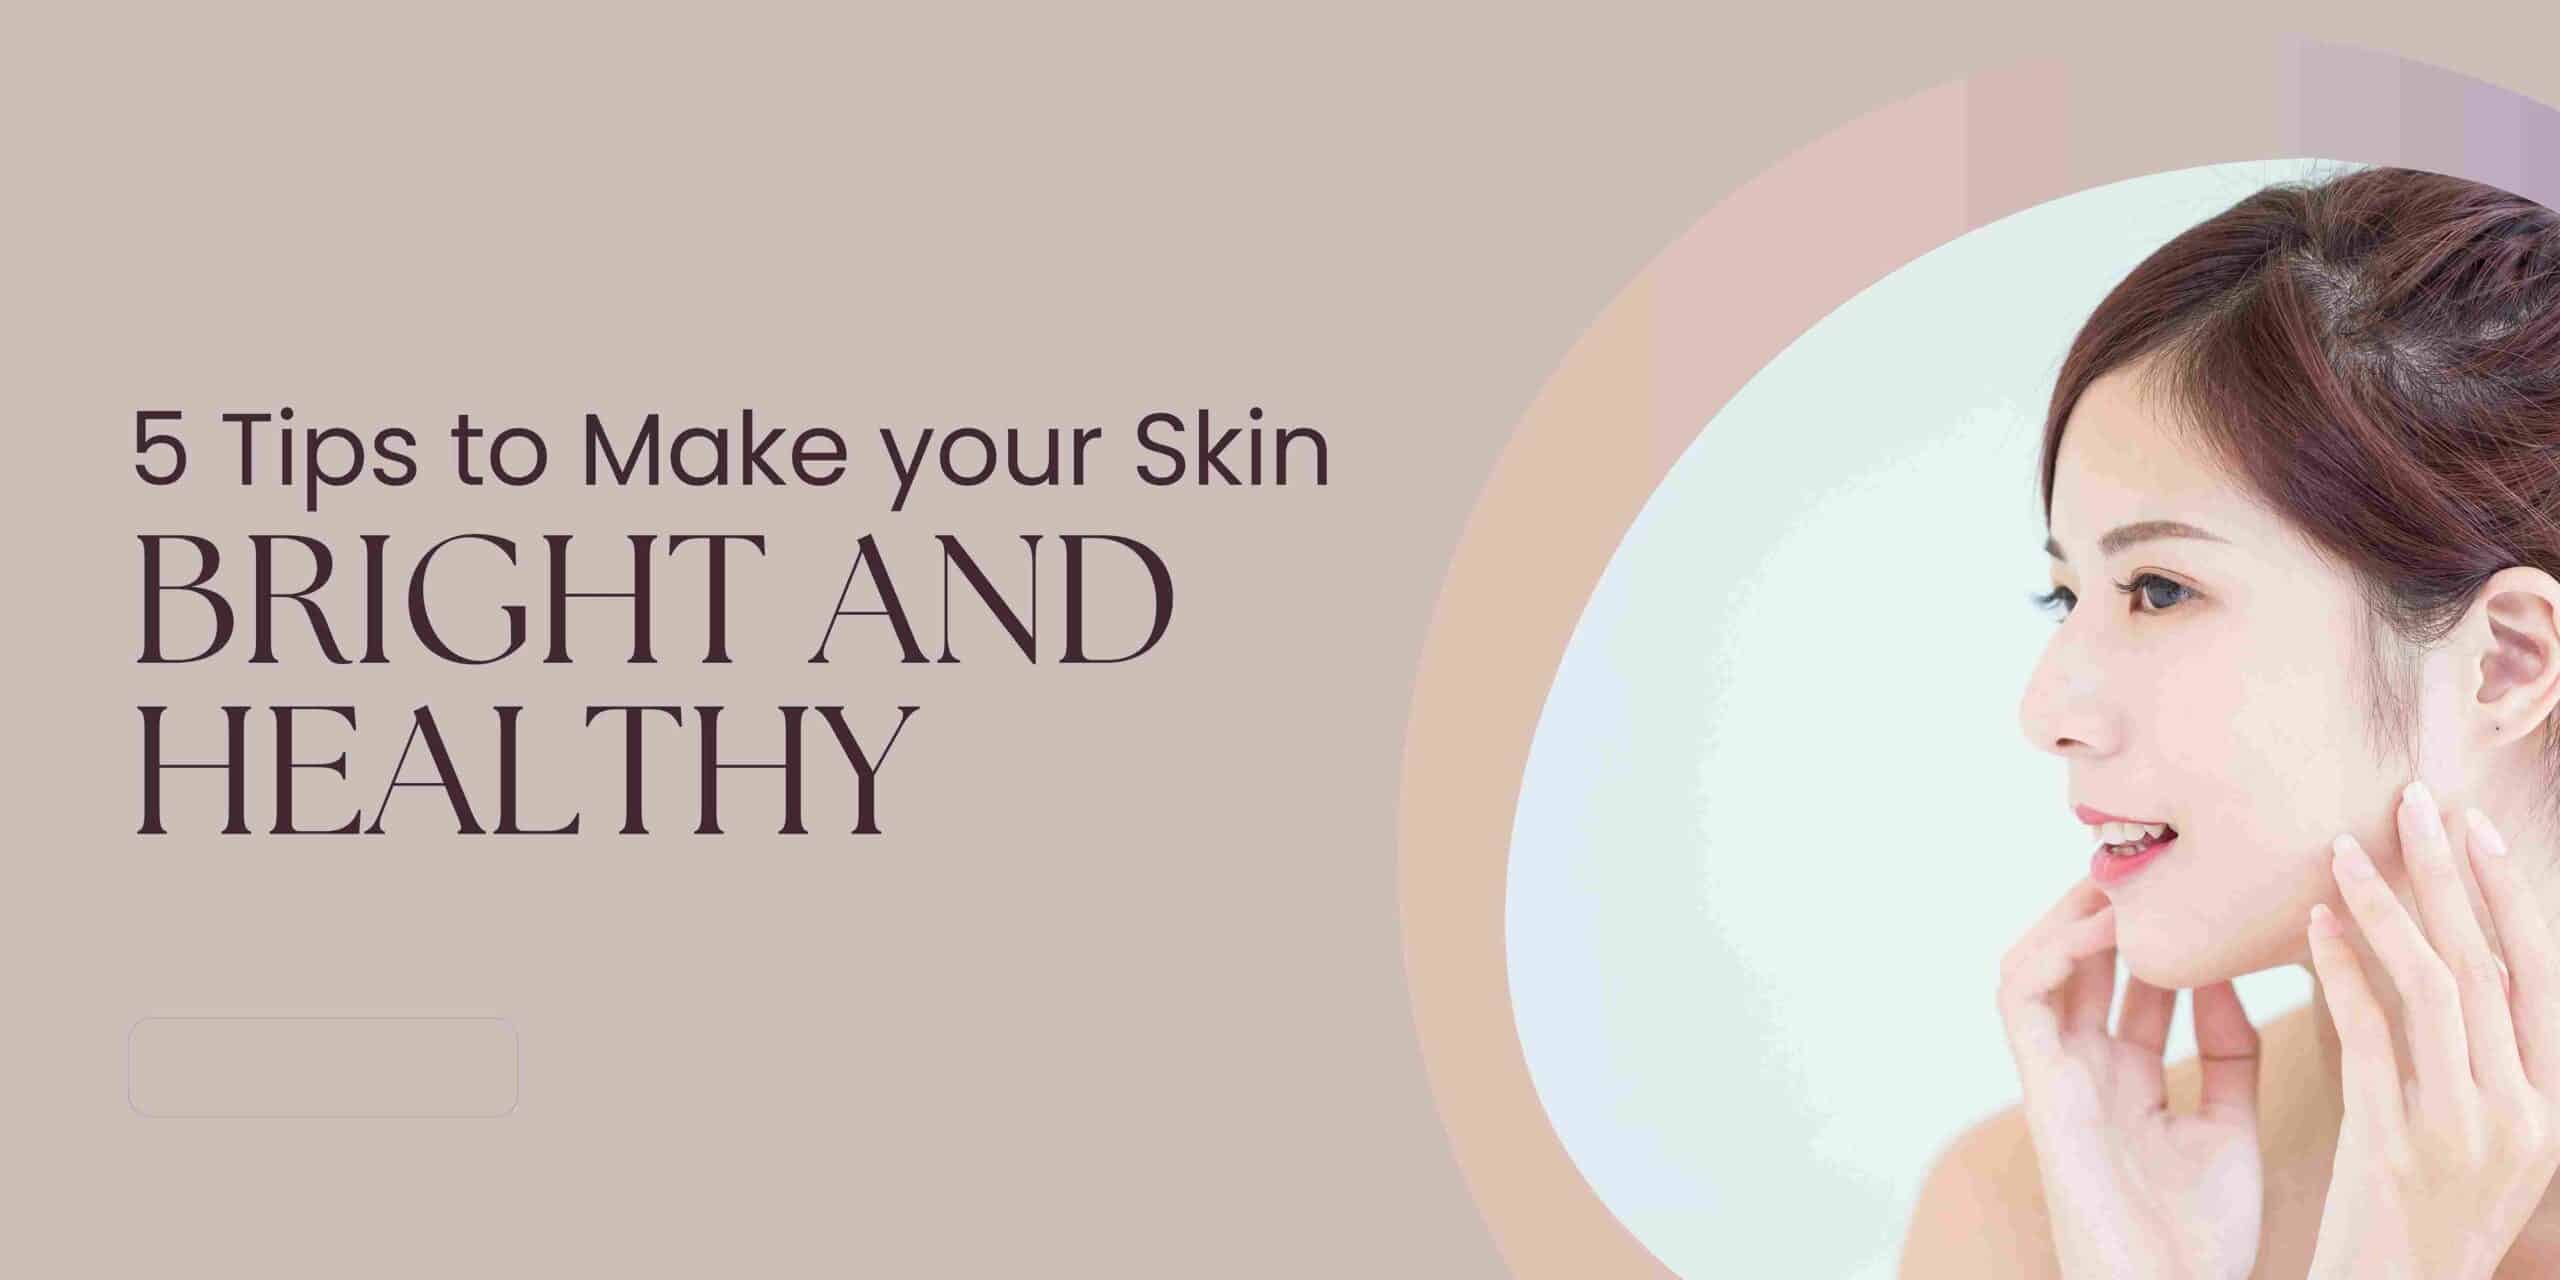 5 Tips to Make your Skin Bright and Healthy